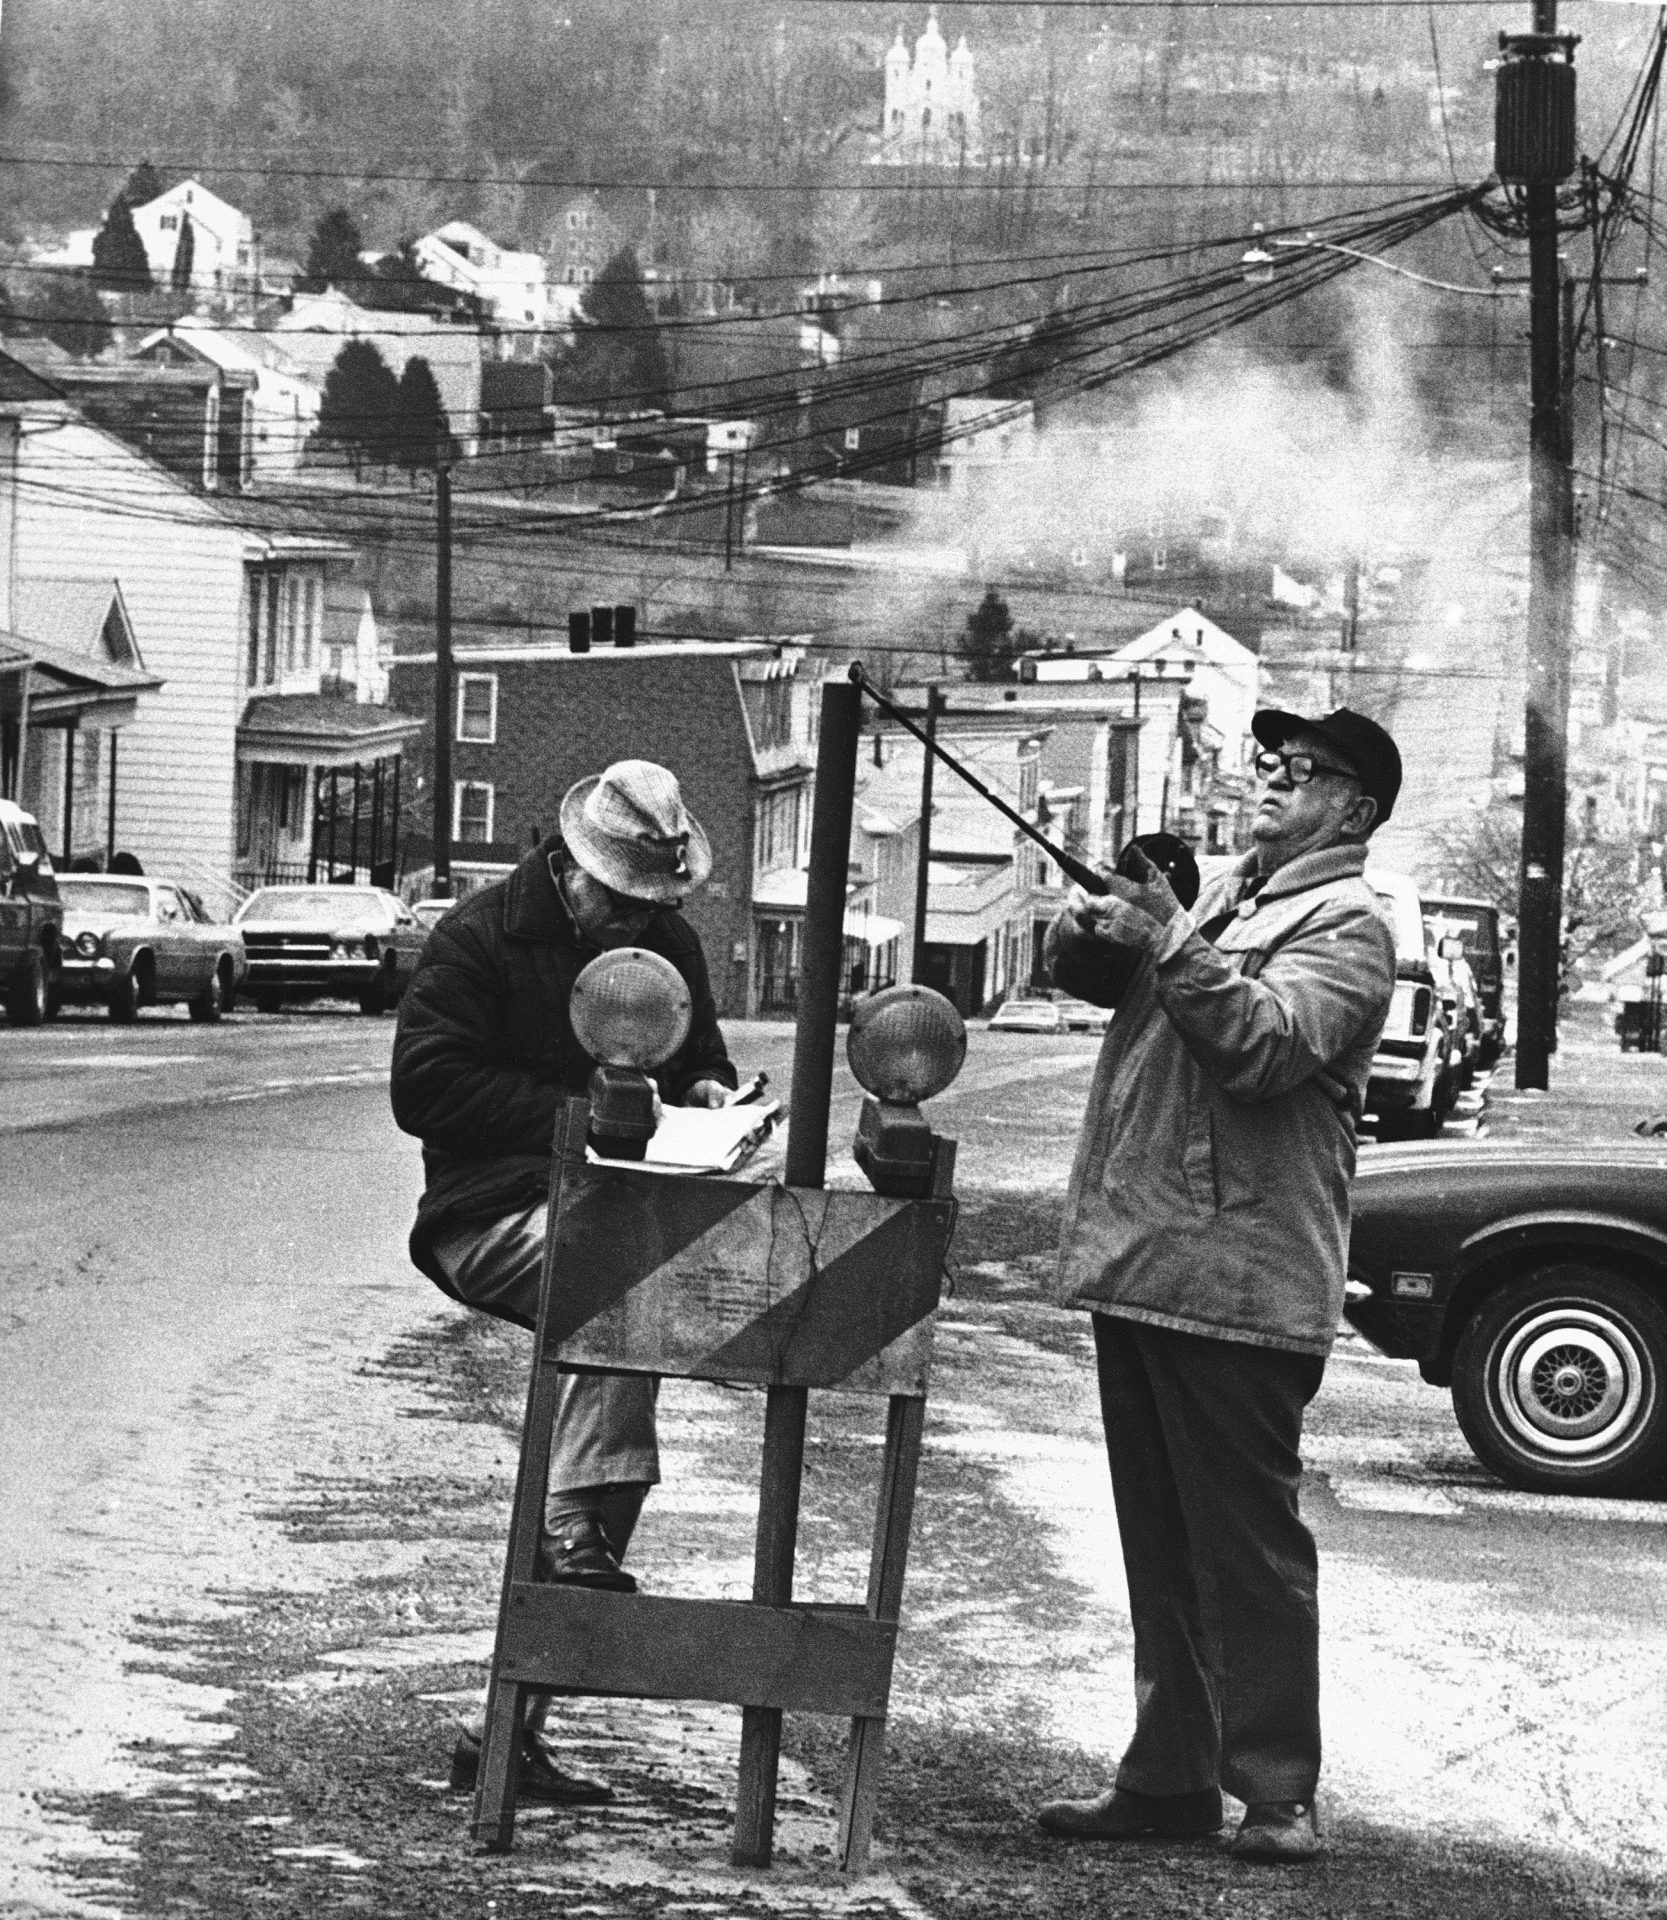 U.S. Bureau of Mines' John Stockalis, right, and Dan Lewis drop a thermometer through a hole on Main Street in Centralia, Pennsylvania on April 2, 1981, to measure the heat from a mine shaft blaze that has burned for 19 years. Townspeople will vote on May 19 to decide if the town should be relocated so the fire can be dug out.